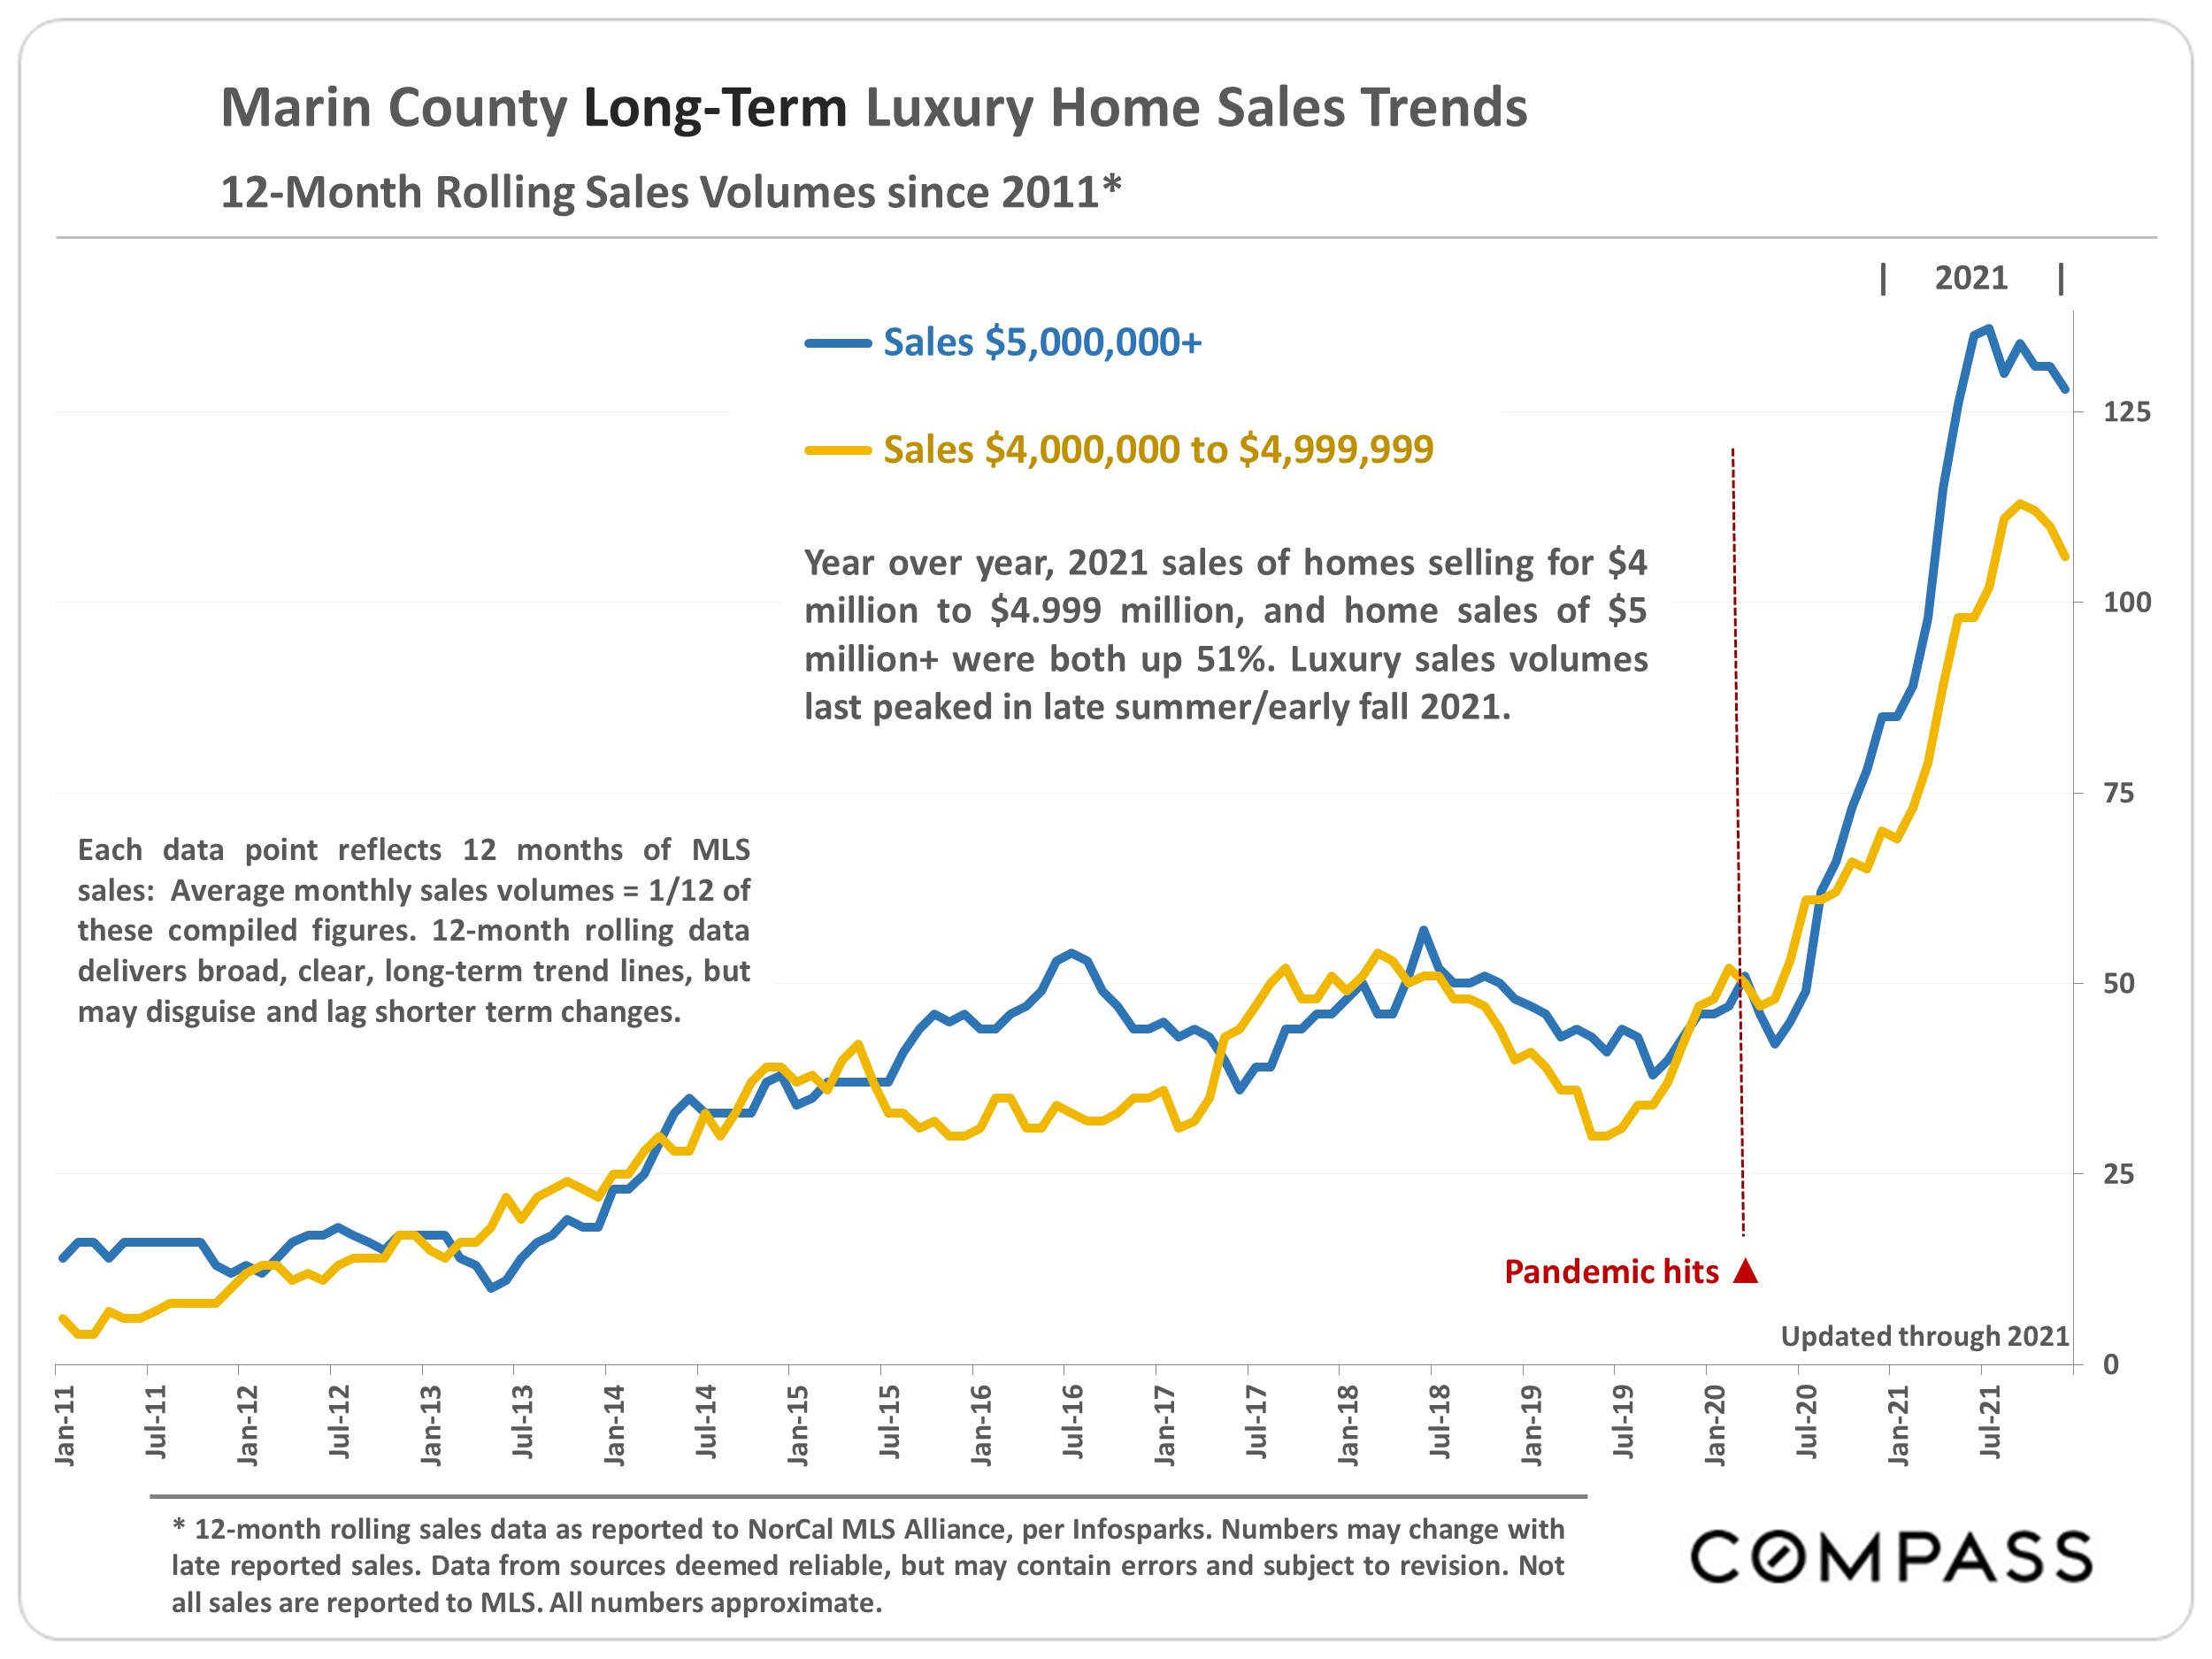  Marin County Long-Term Luxury Home Sales Trends